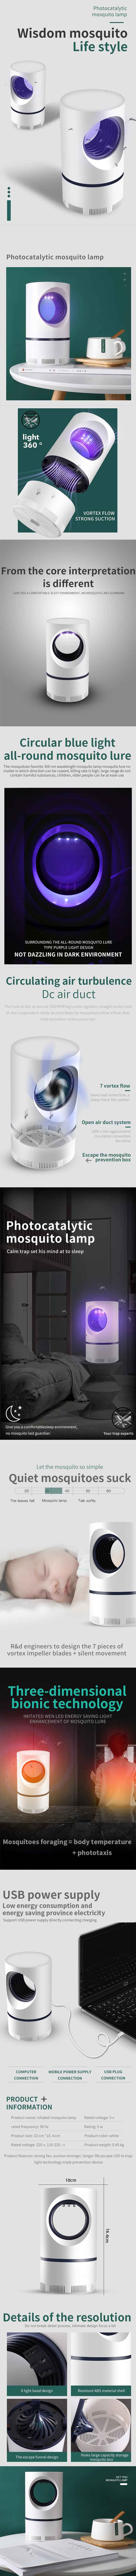 Mosquito Lamp - Kook Central